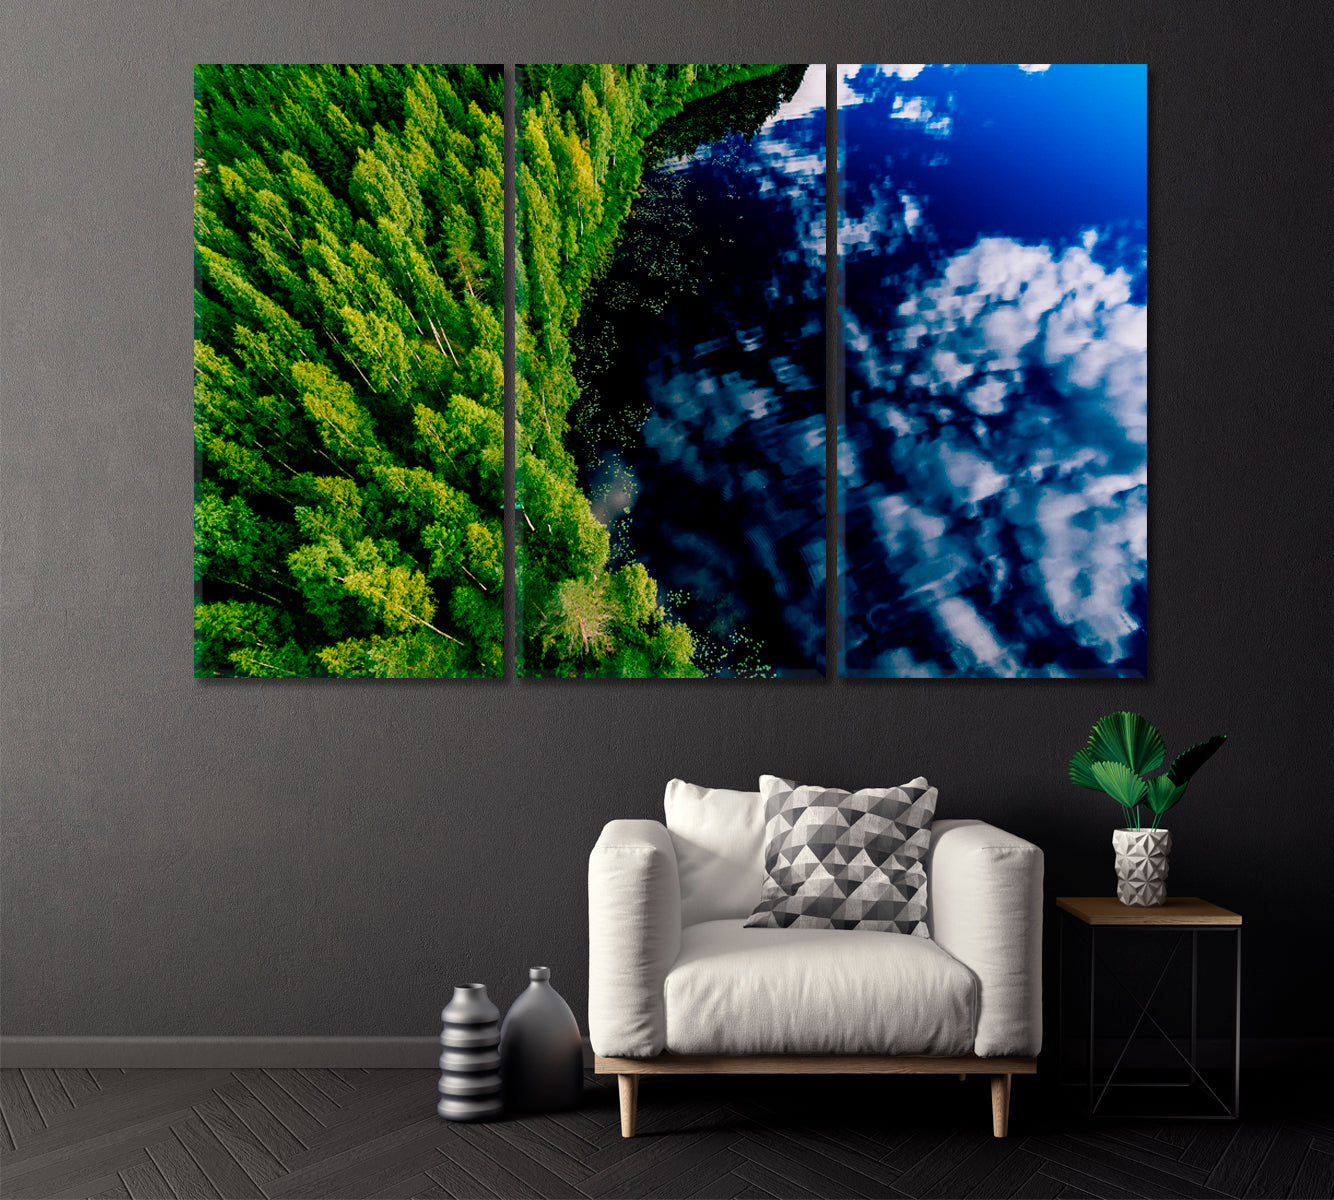 Finland Blue Lake and Green Forest Canvas Print ArtLexy 3 Panels 36"x24" inches 